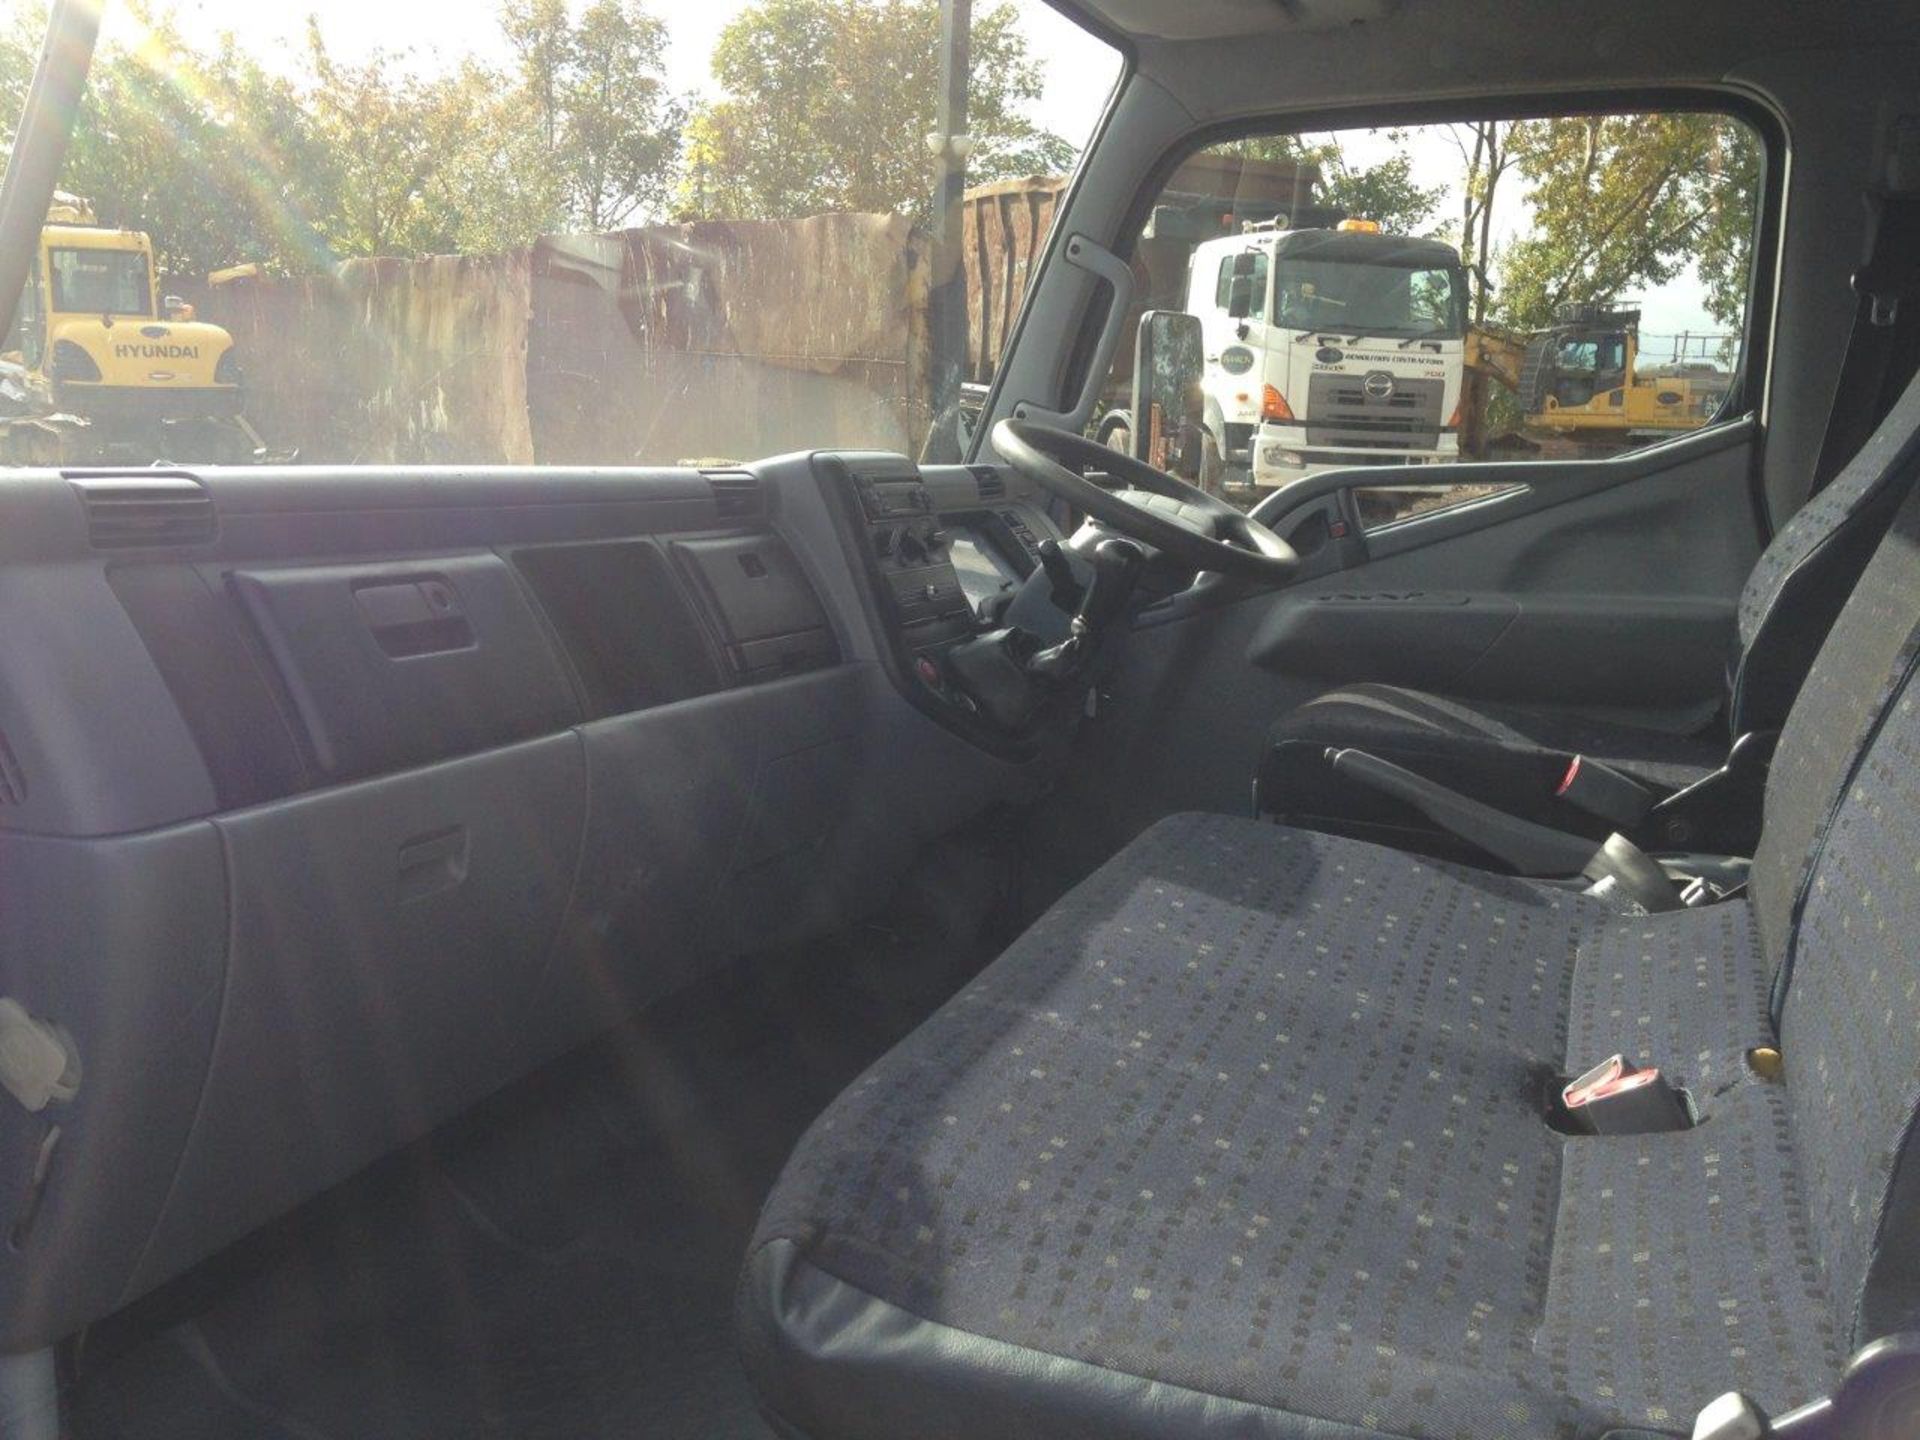 2009/59 REG MITSUBISHI FUSO CANTER 3C13-34 LWB 14 FT DROPSIDE TRUCK ONE OWNER - Image 7 of 10